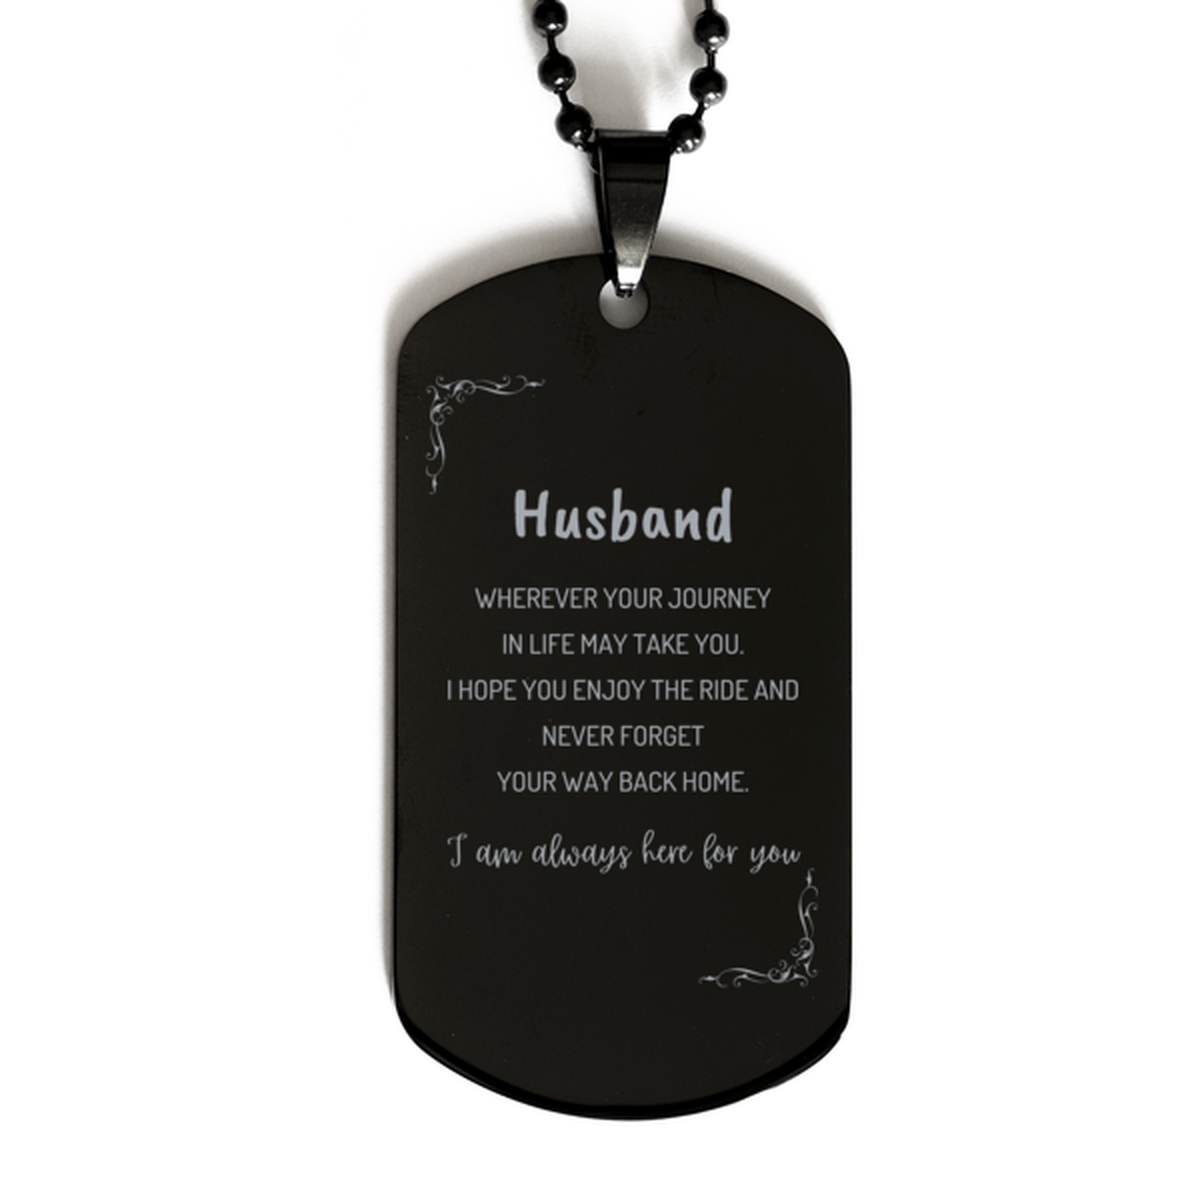 Husband wherever your journey in life may take you, I am always here for you Husband Black Dog Tag, Awesome Christmas Gifts For Husband, Husband Birthday Gifts for Men Women Family Loved One